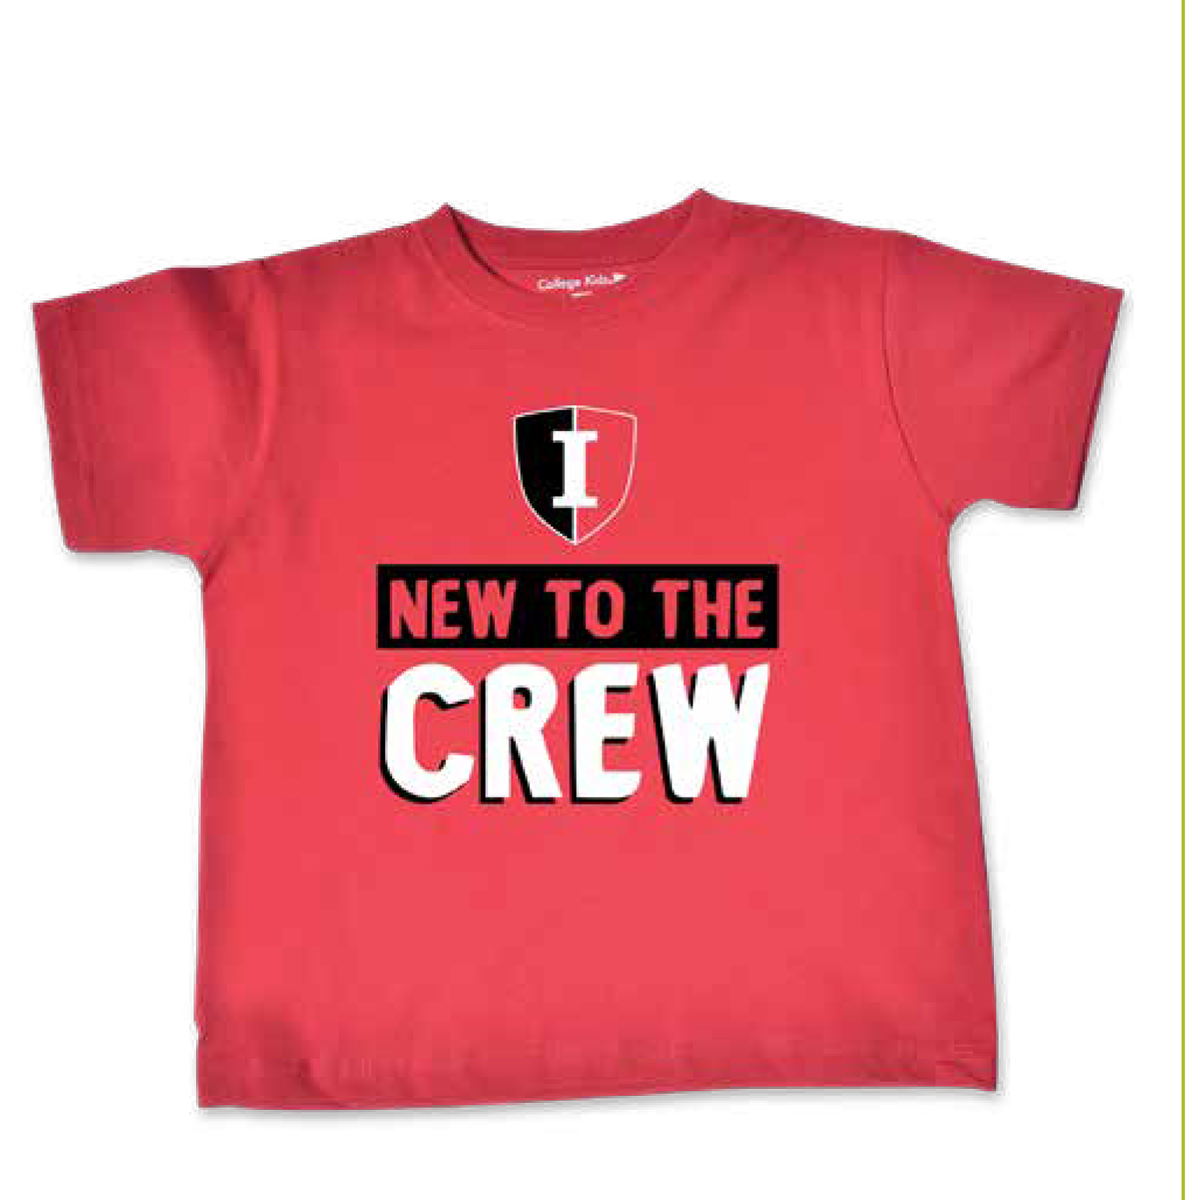 Toddler Tee New to the Crew by College Kids